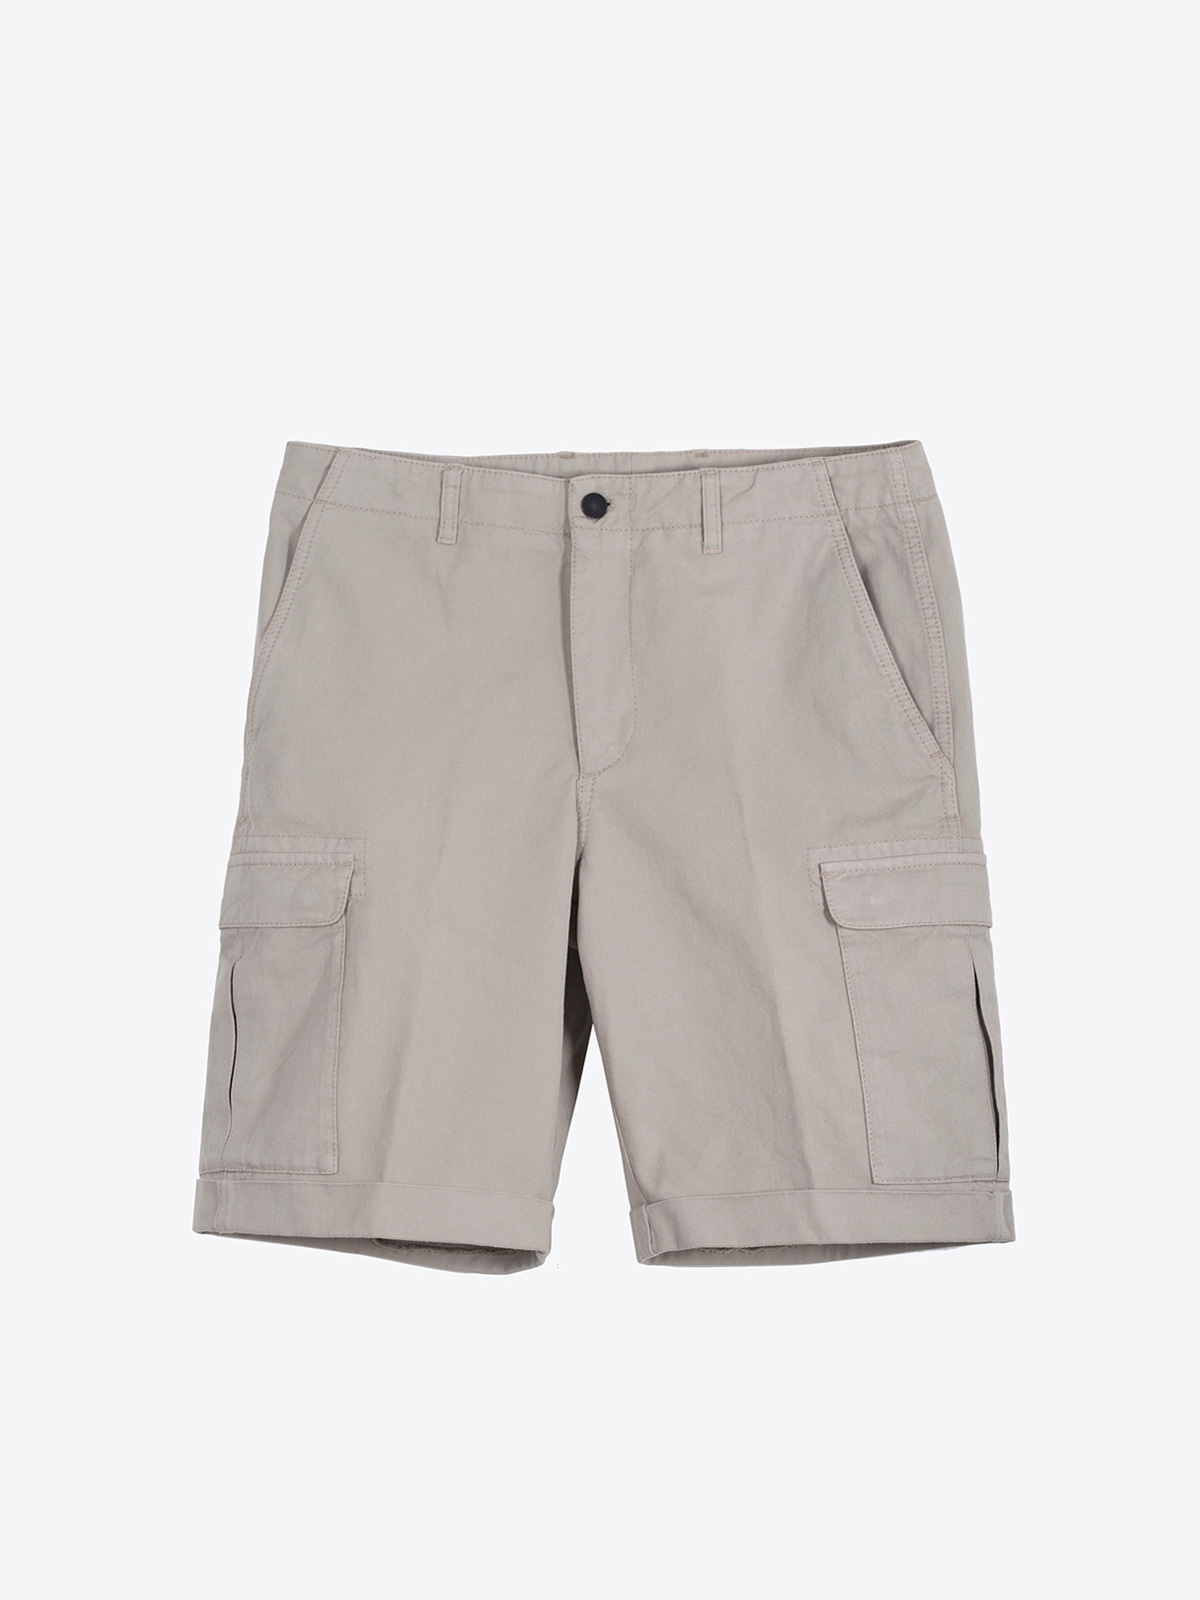 airbag craftworks lieblingstrousers 020 | daily island shorts 